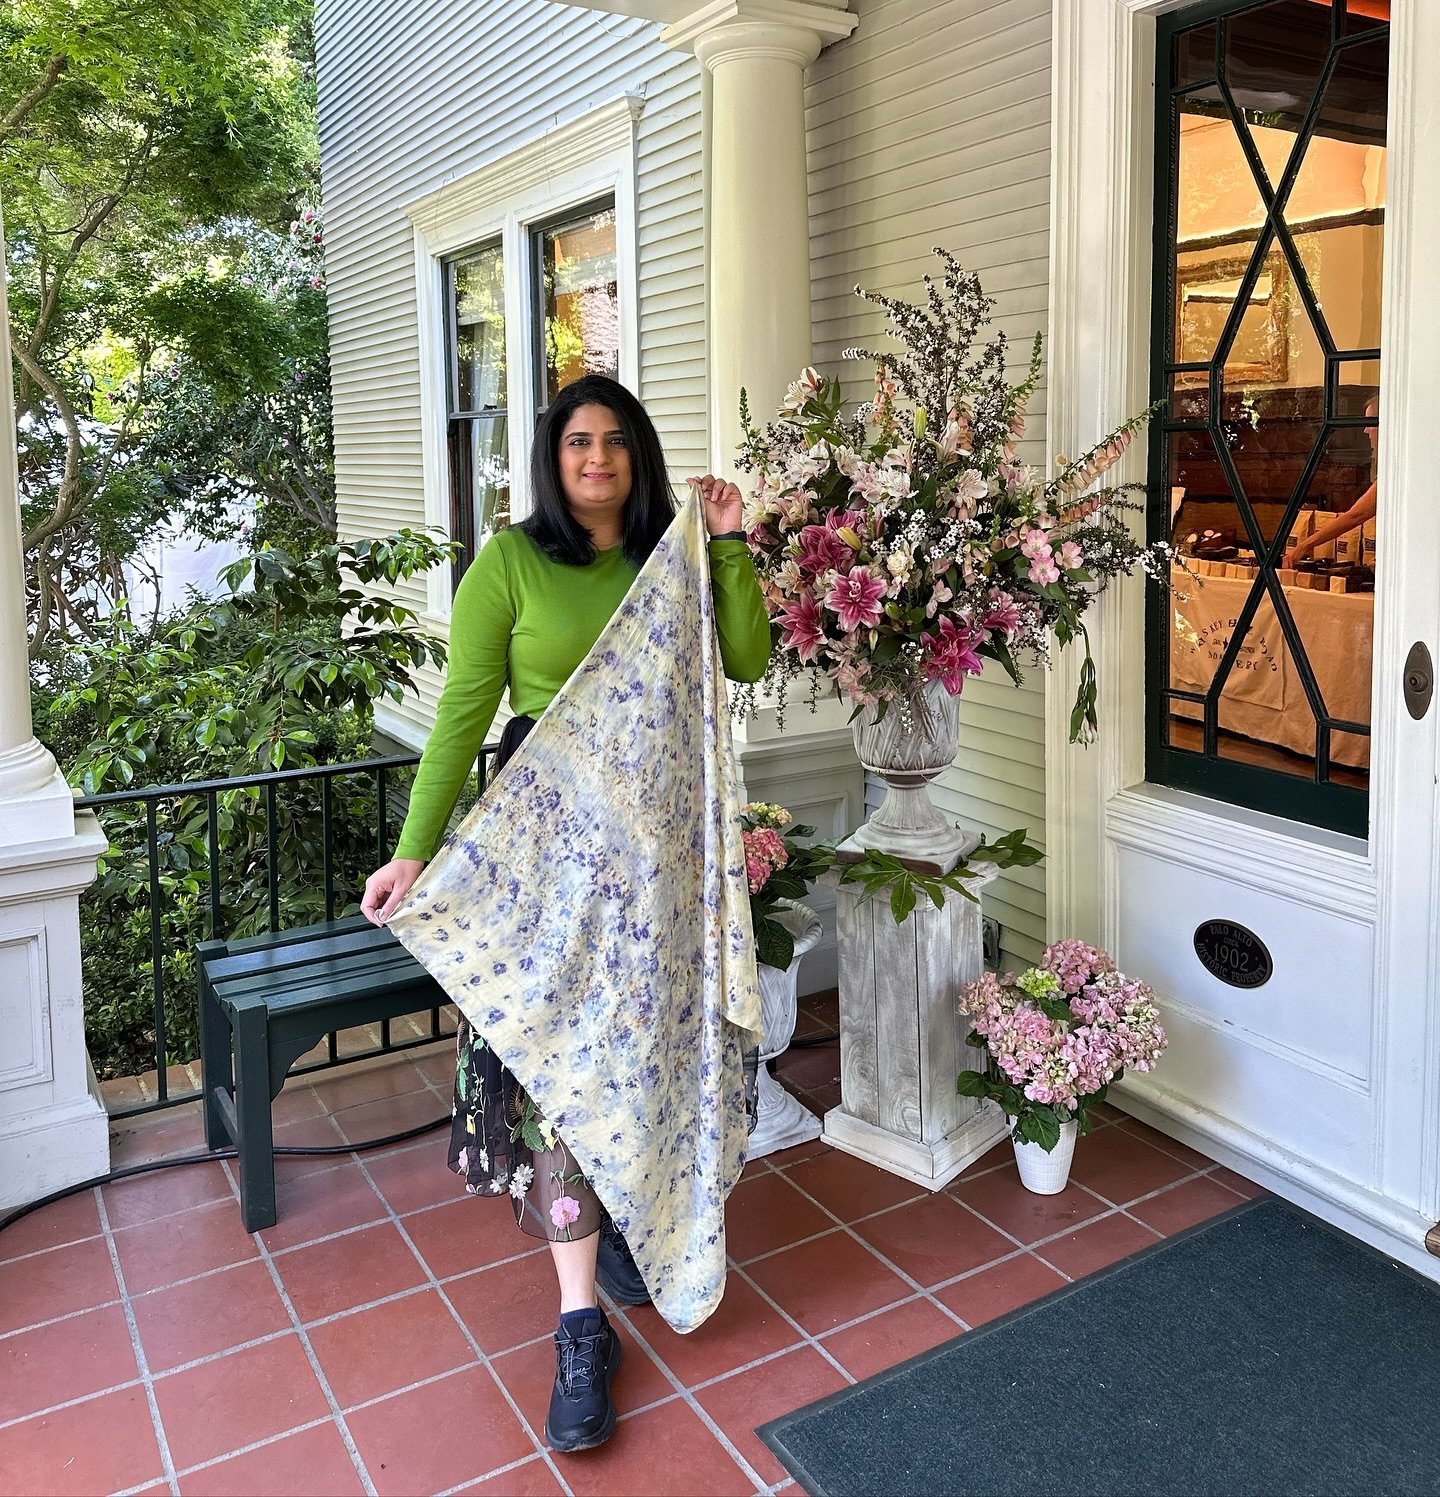 An anthophile&rsquo;s dream come true 💜
Having a floral moment with the &ldquo;Abundance&rdquo; botanically dyed silk scarf at Gamble Garden Spring Tour. 

#ecoprinted #botanicallydyed #oneofakind #anthophile #gamblegarden